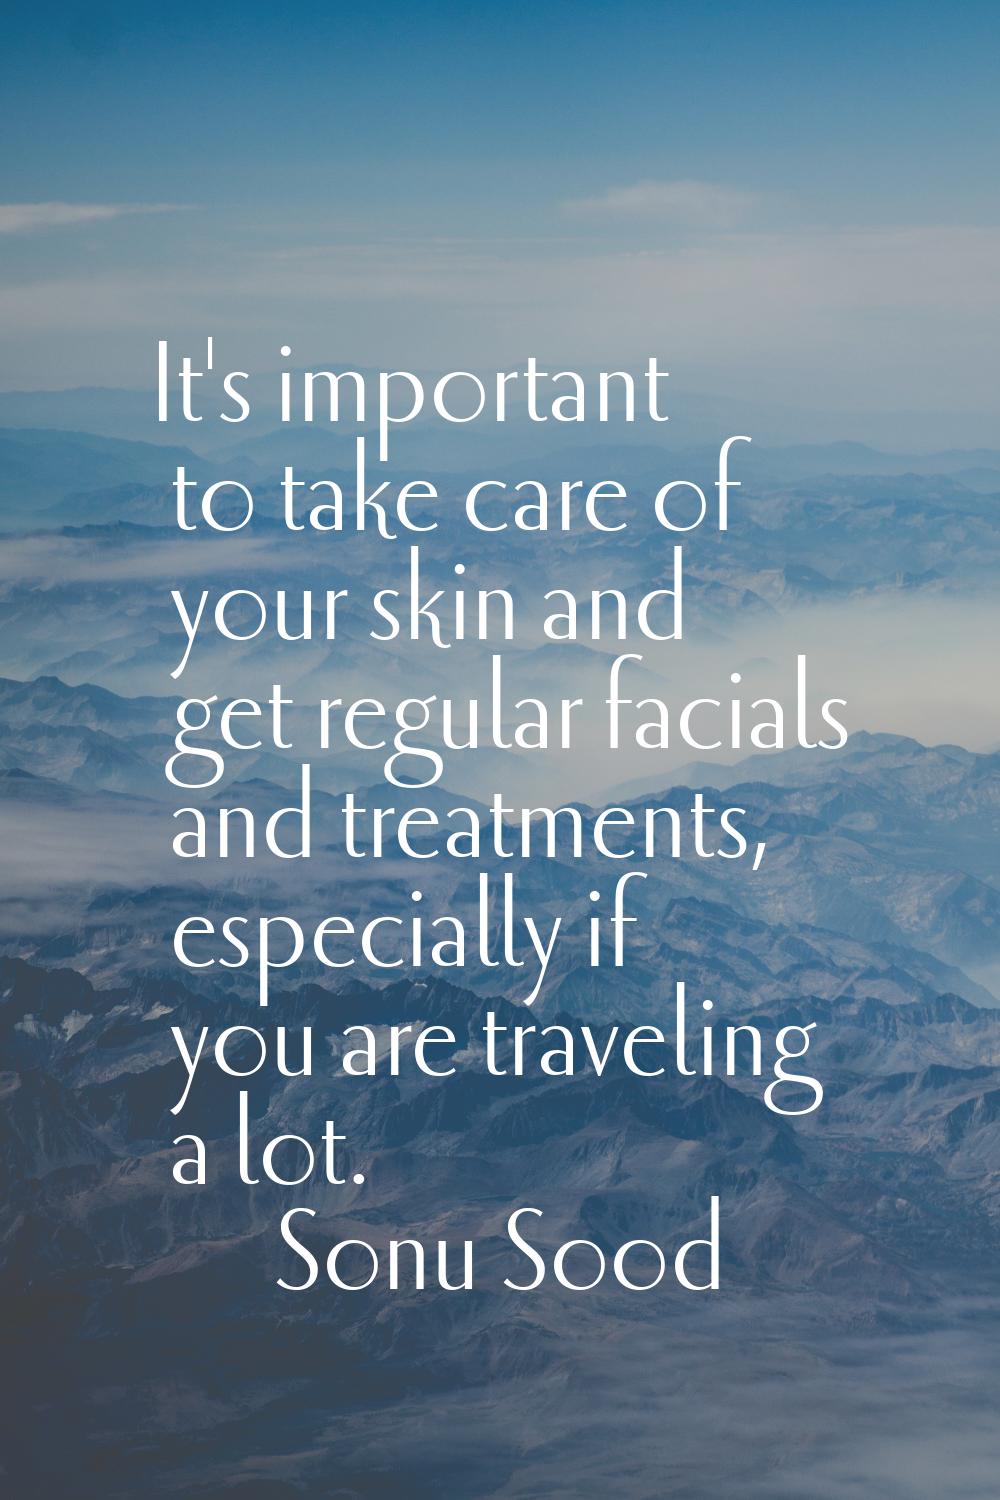 It's important to take care of your skin and get regular facials and treatments, especially if you 